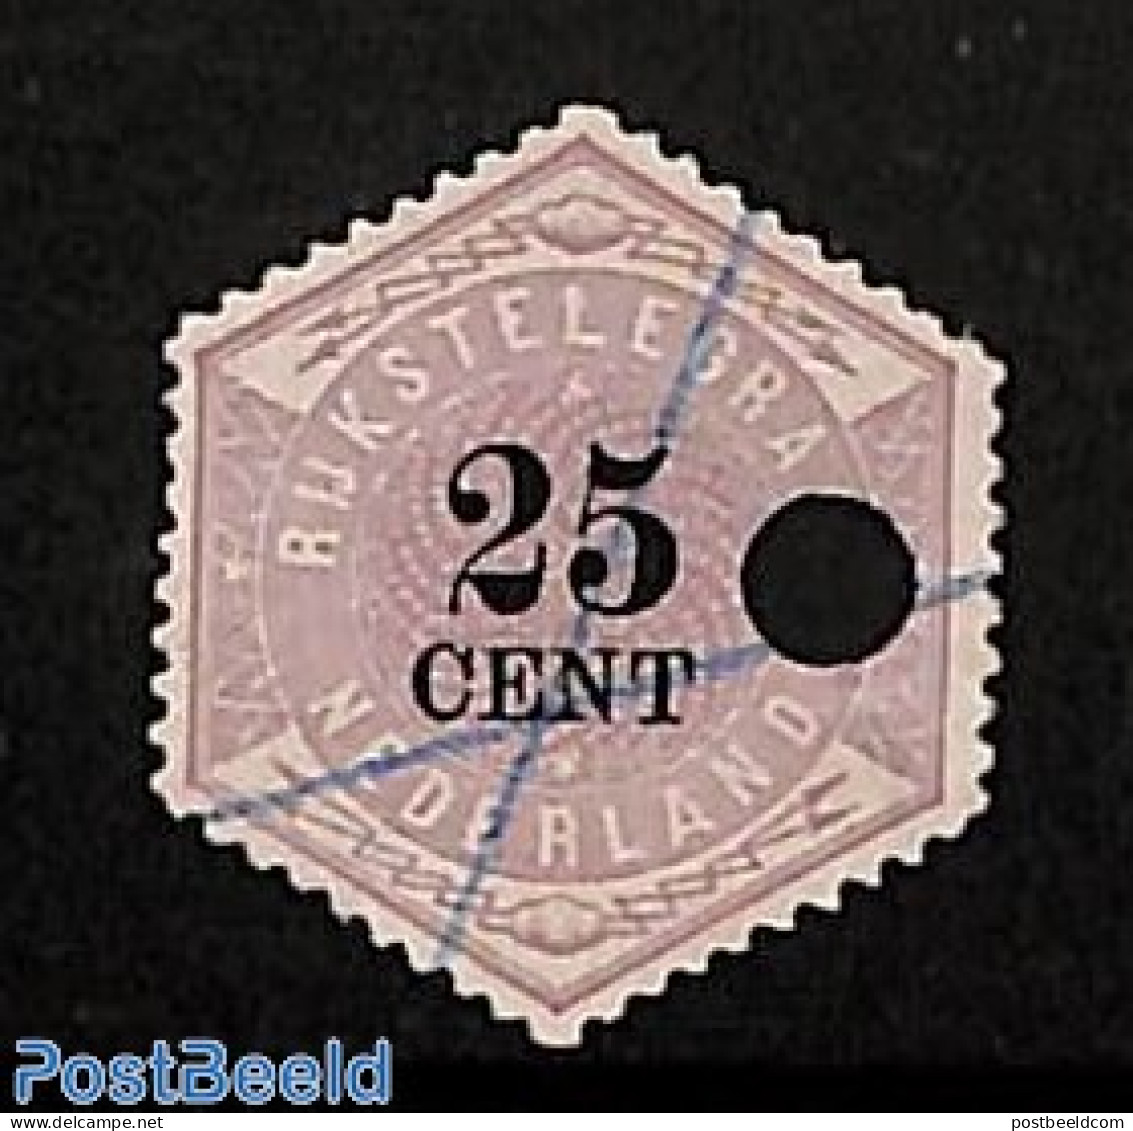 Netherlands 1877 Telegraph Stamp 25c Used 1v, Used Or CTO - Telegraph